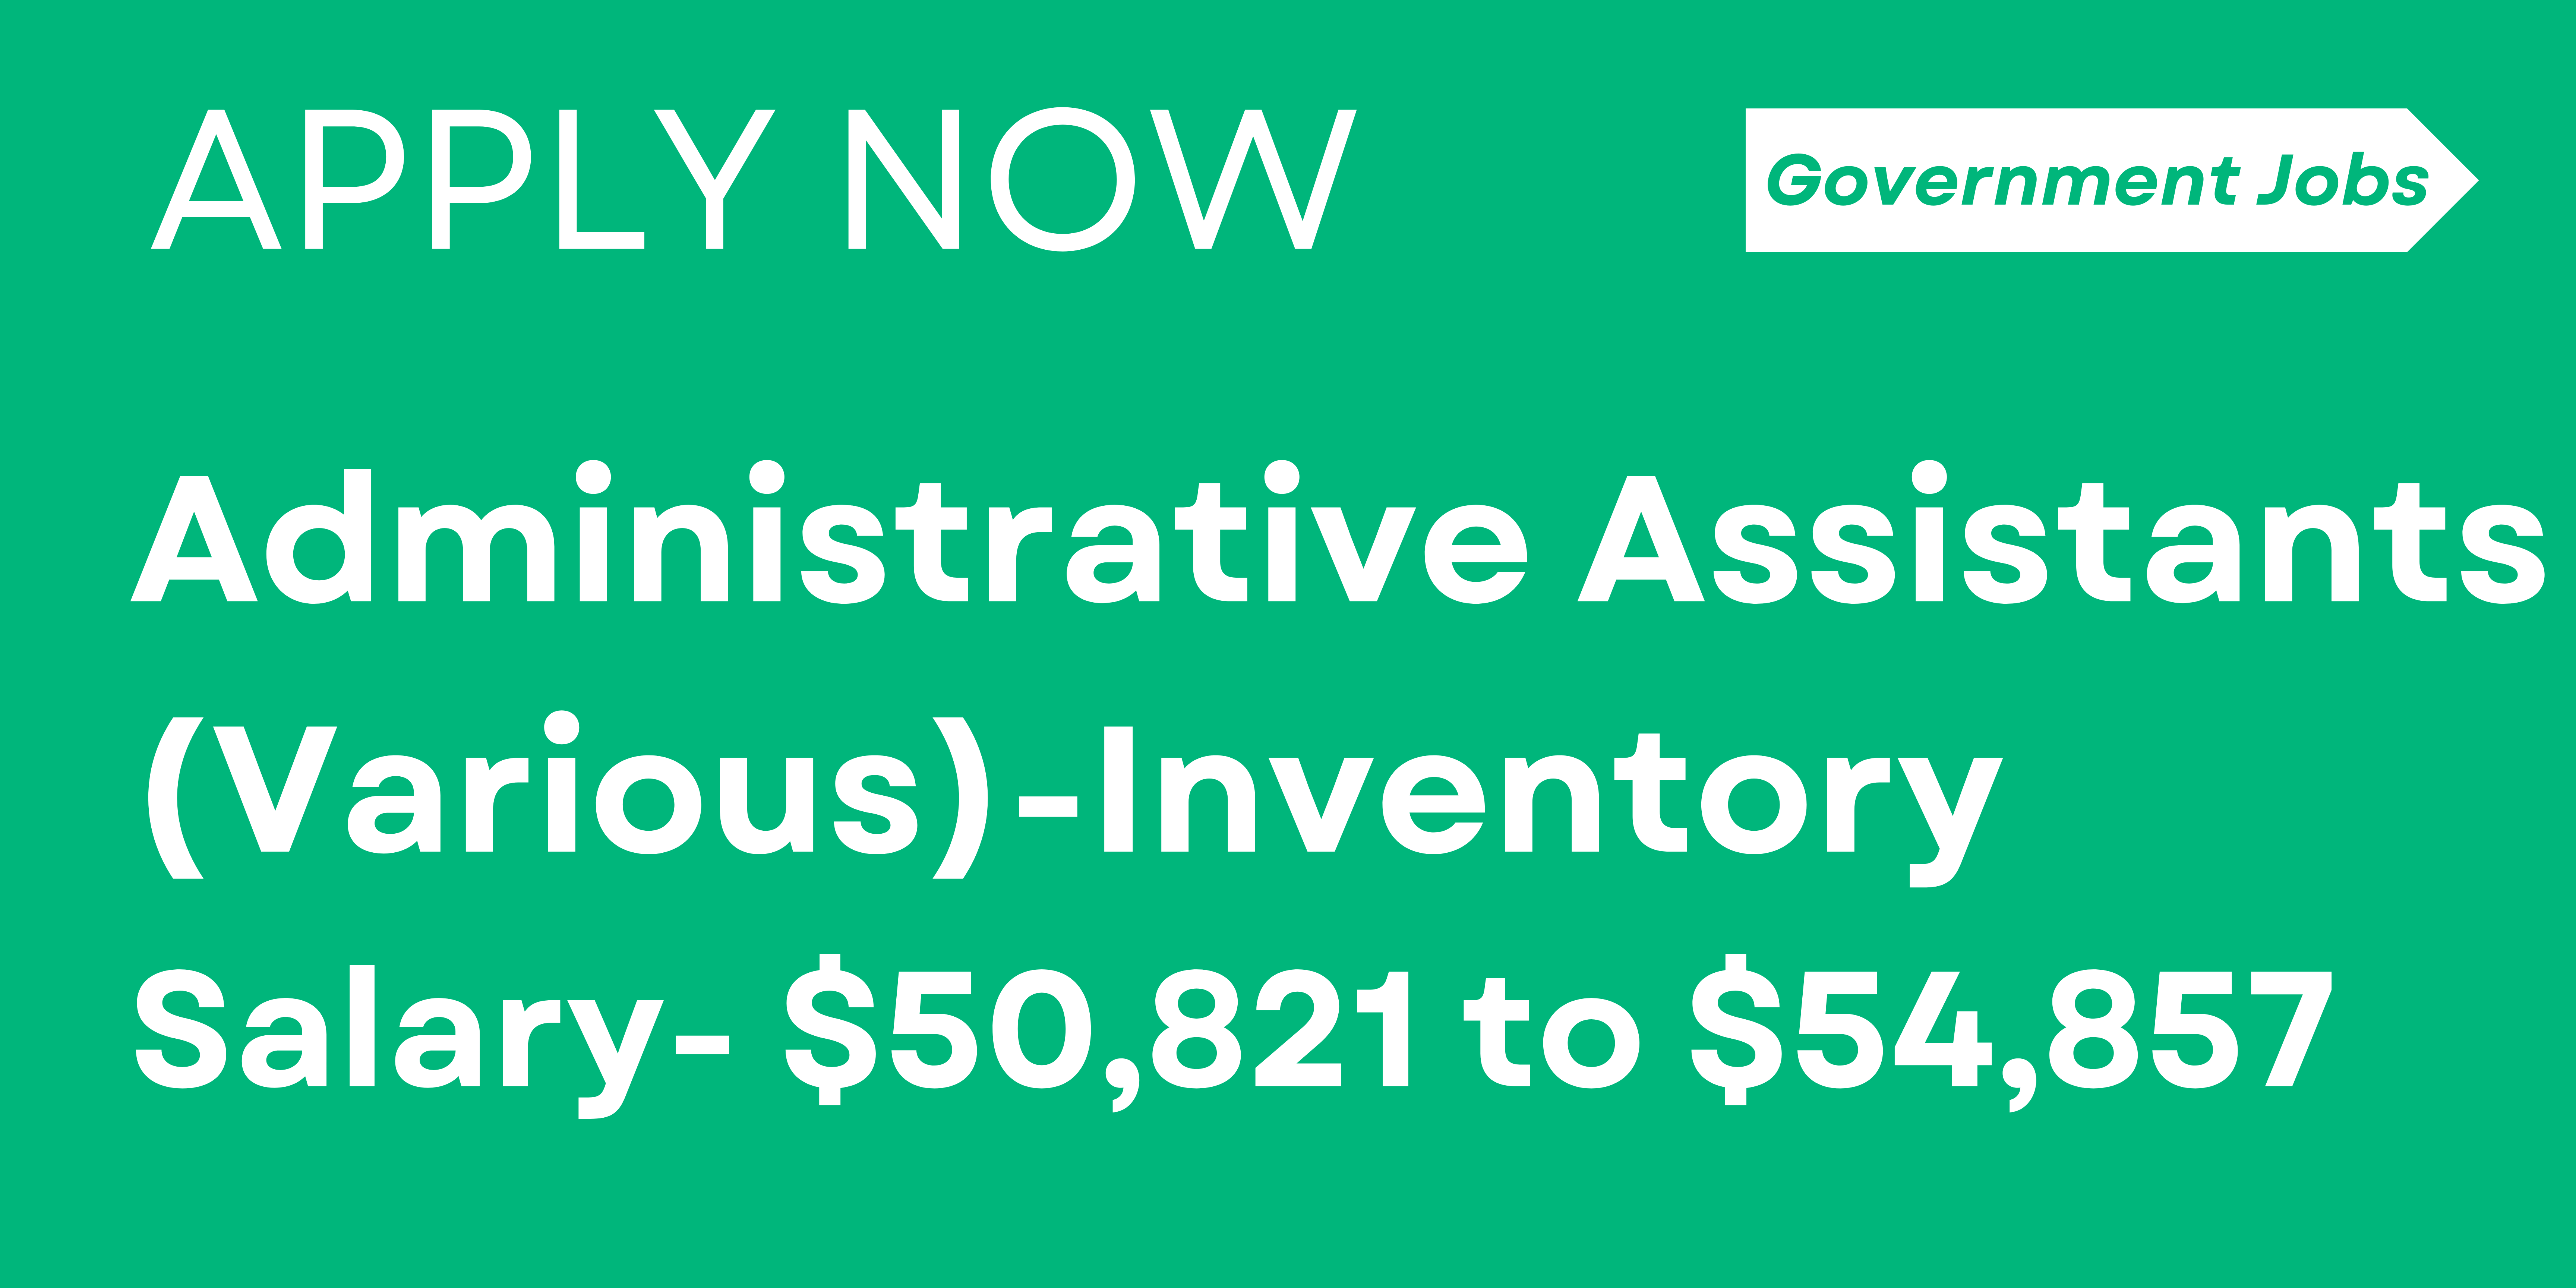 Administrative Assistants (Various)-Inventory